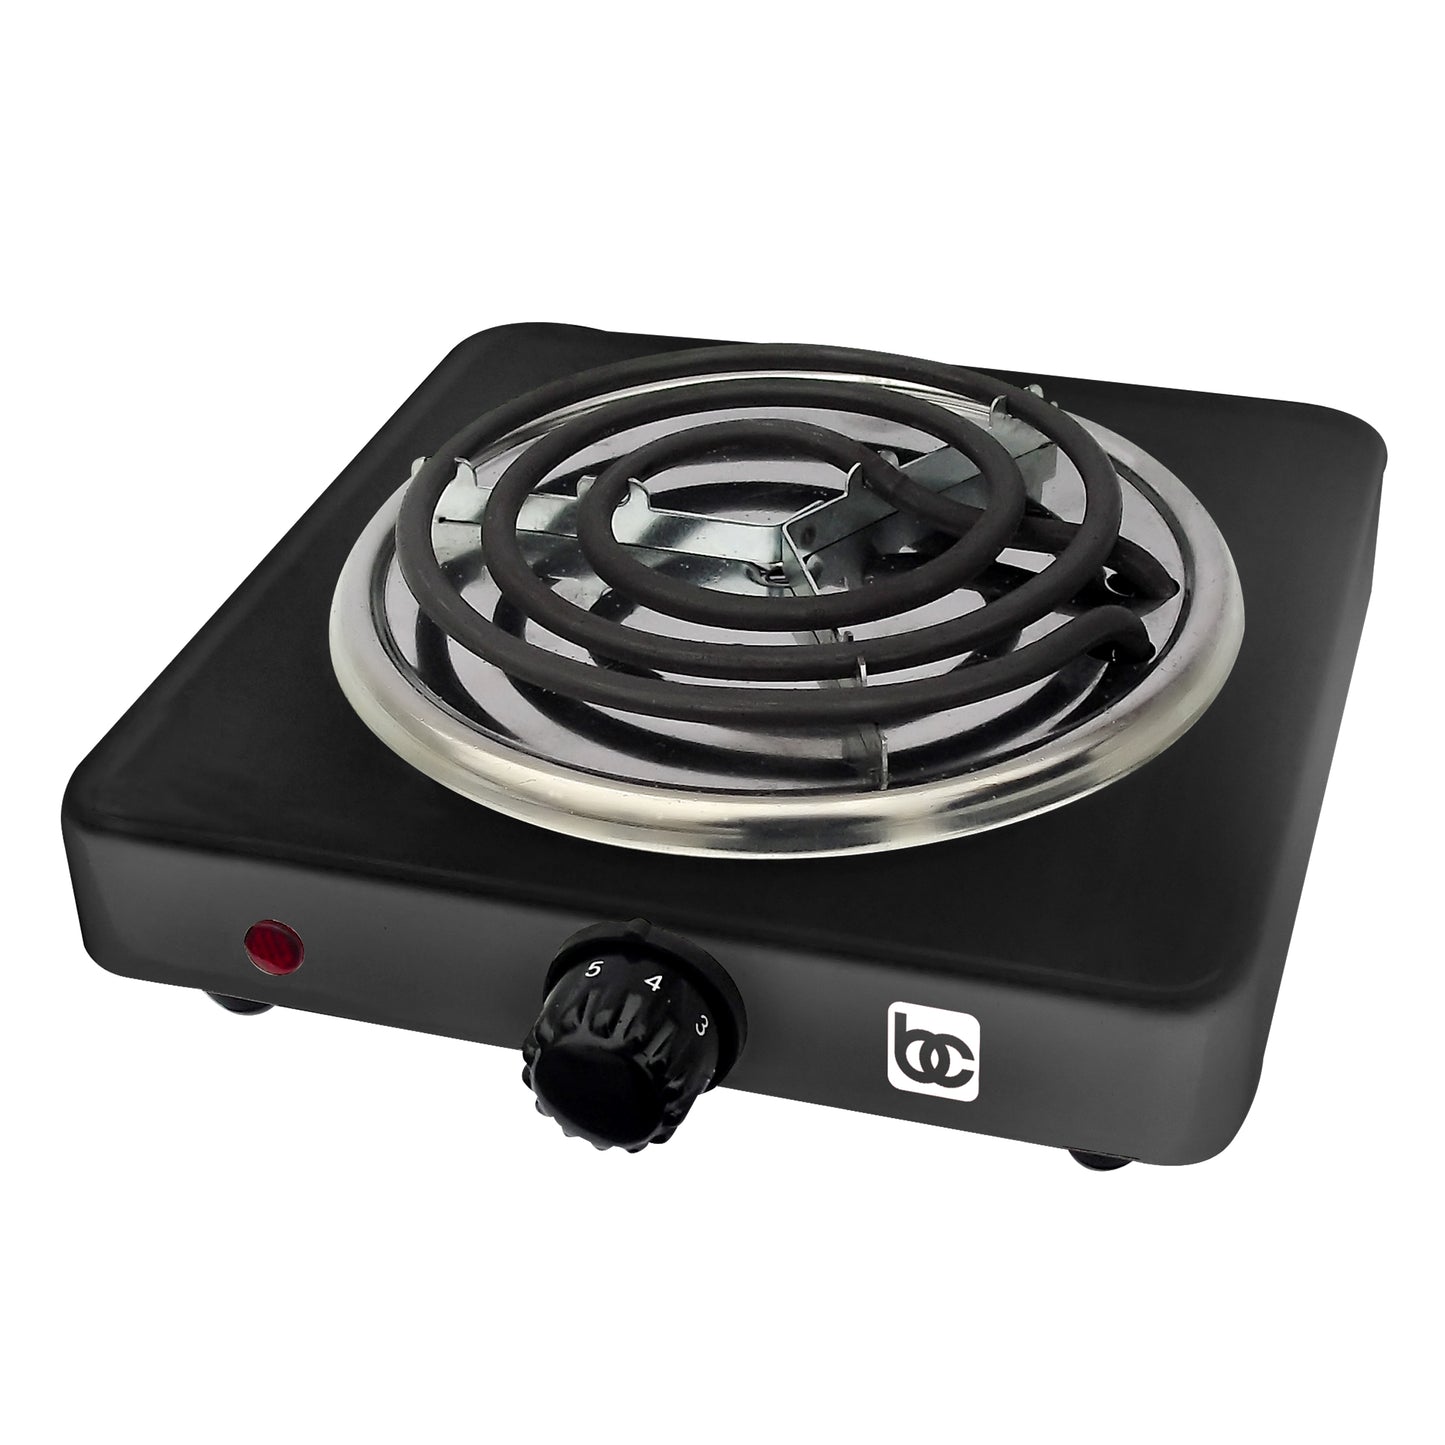 1000W Portable Single Electric Burner Hot Plate Camping Stove Stainless 110V